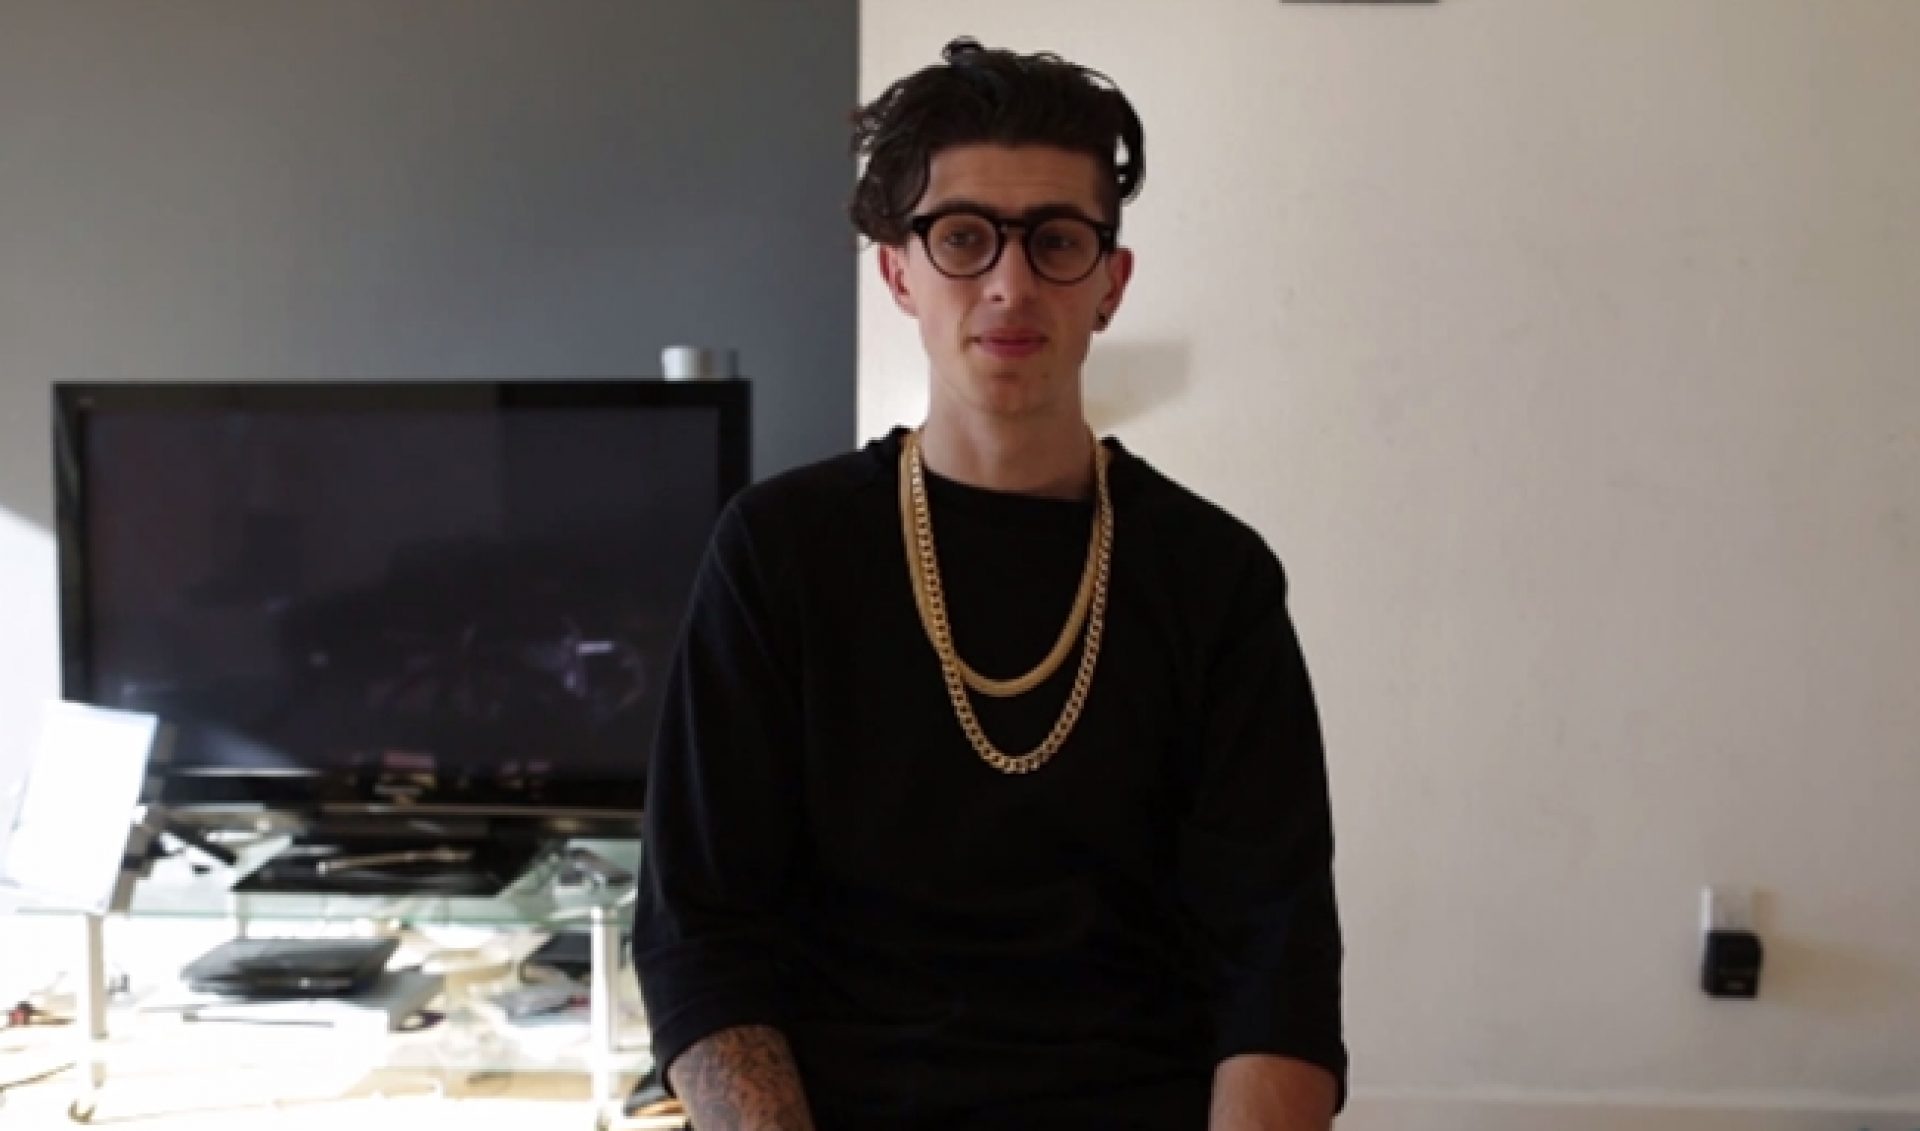 Sorry, Sam Pepper, But Your “Experiment” Was Not OK